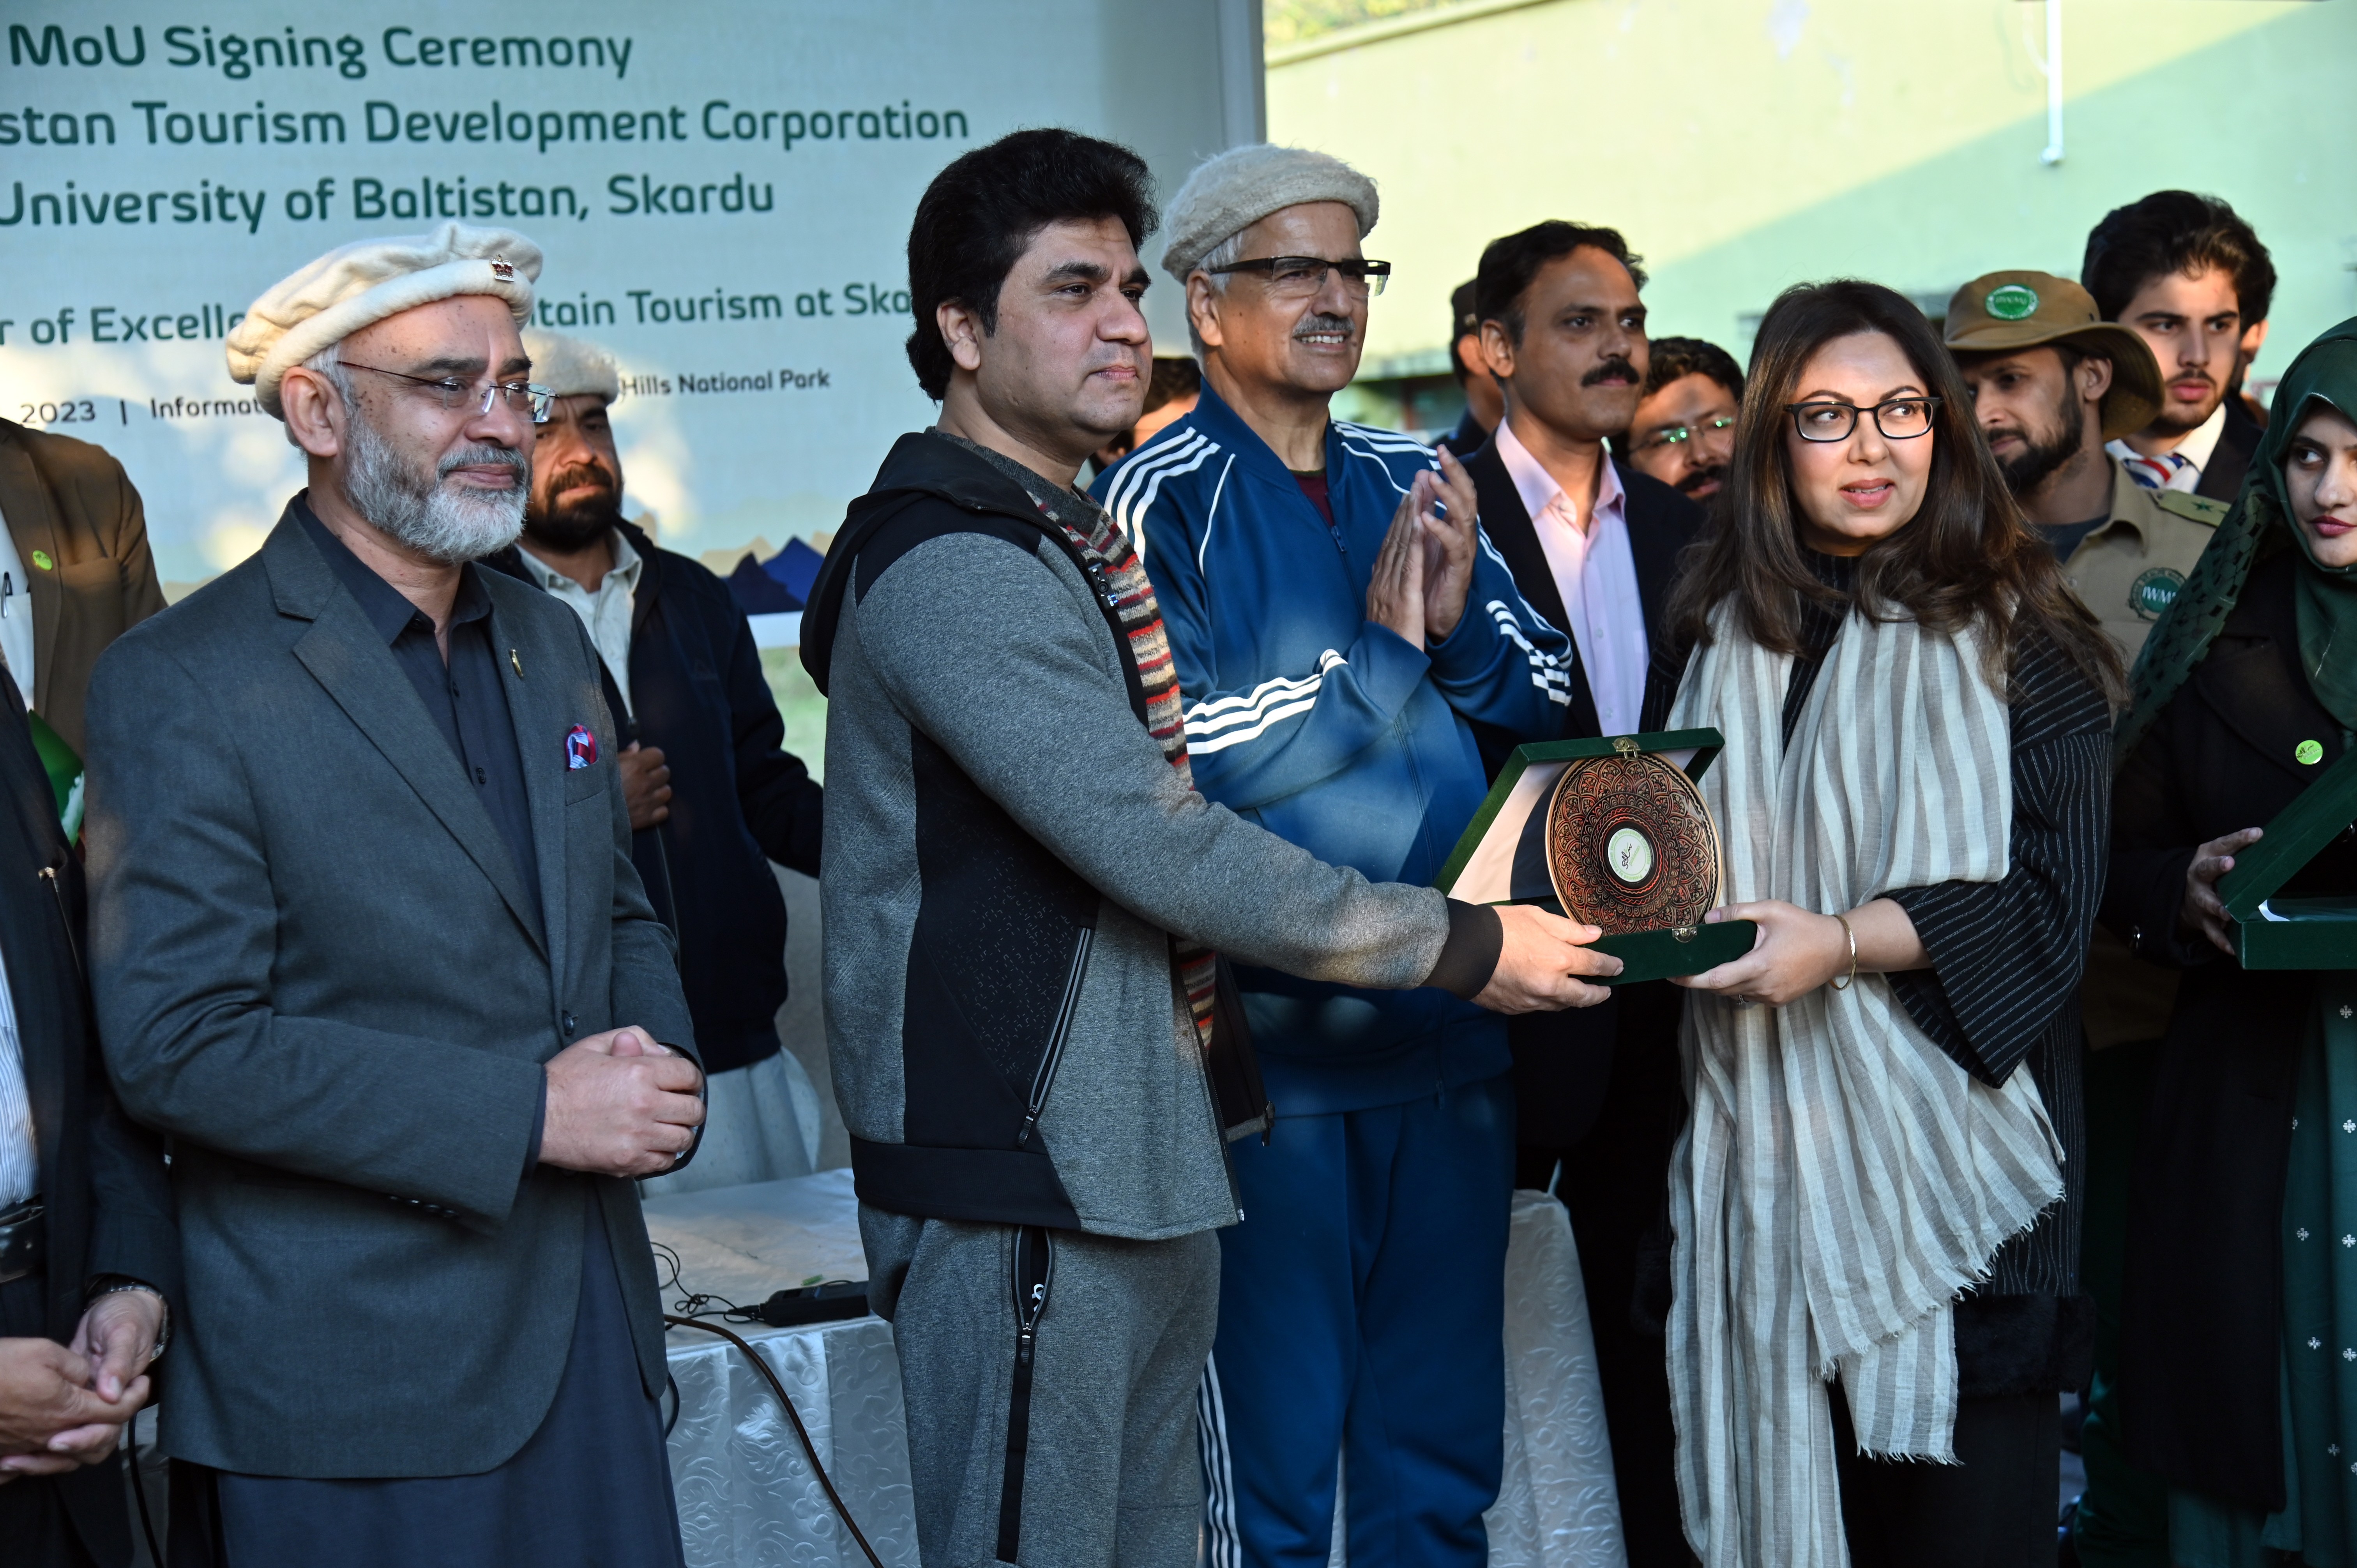 The Award Distribution Ceremony for appreciation on International Mountain Day